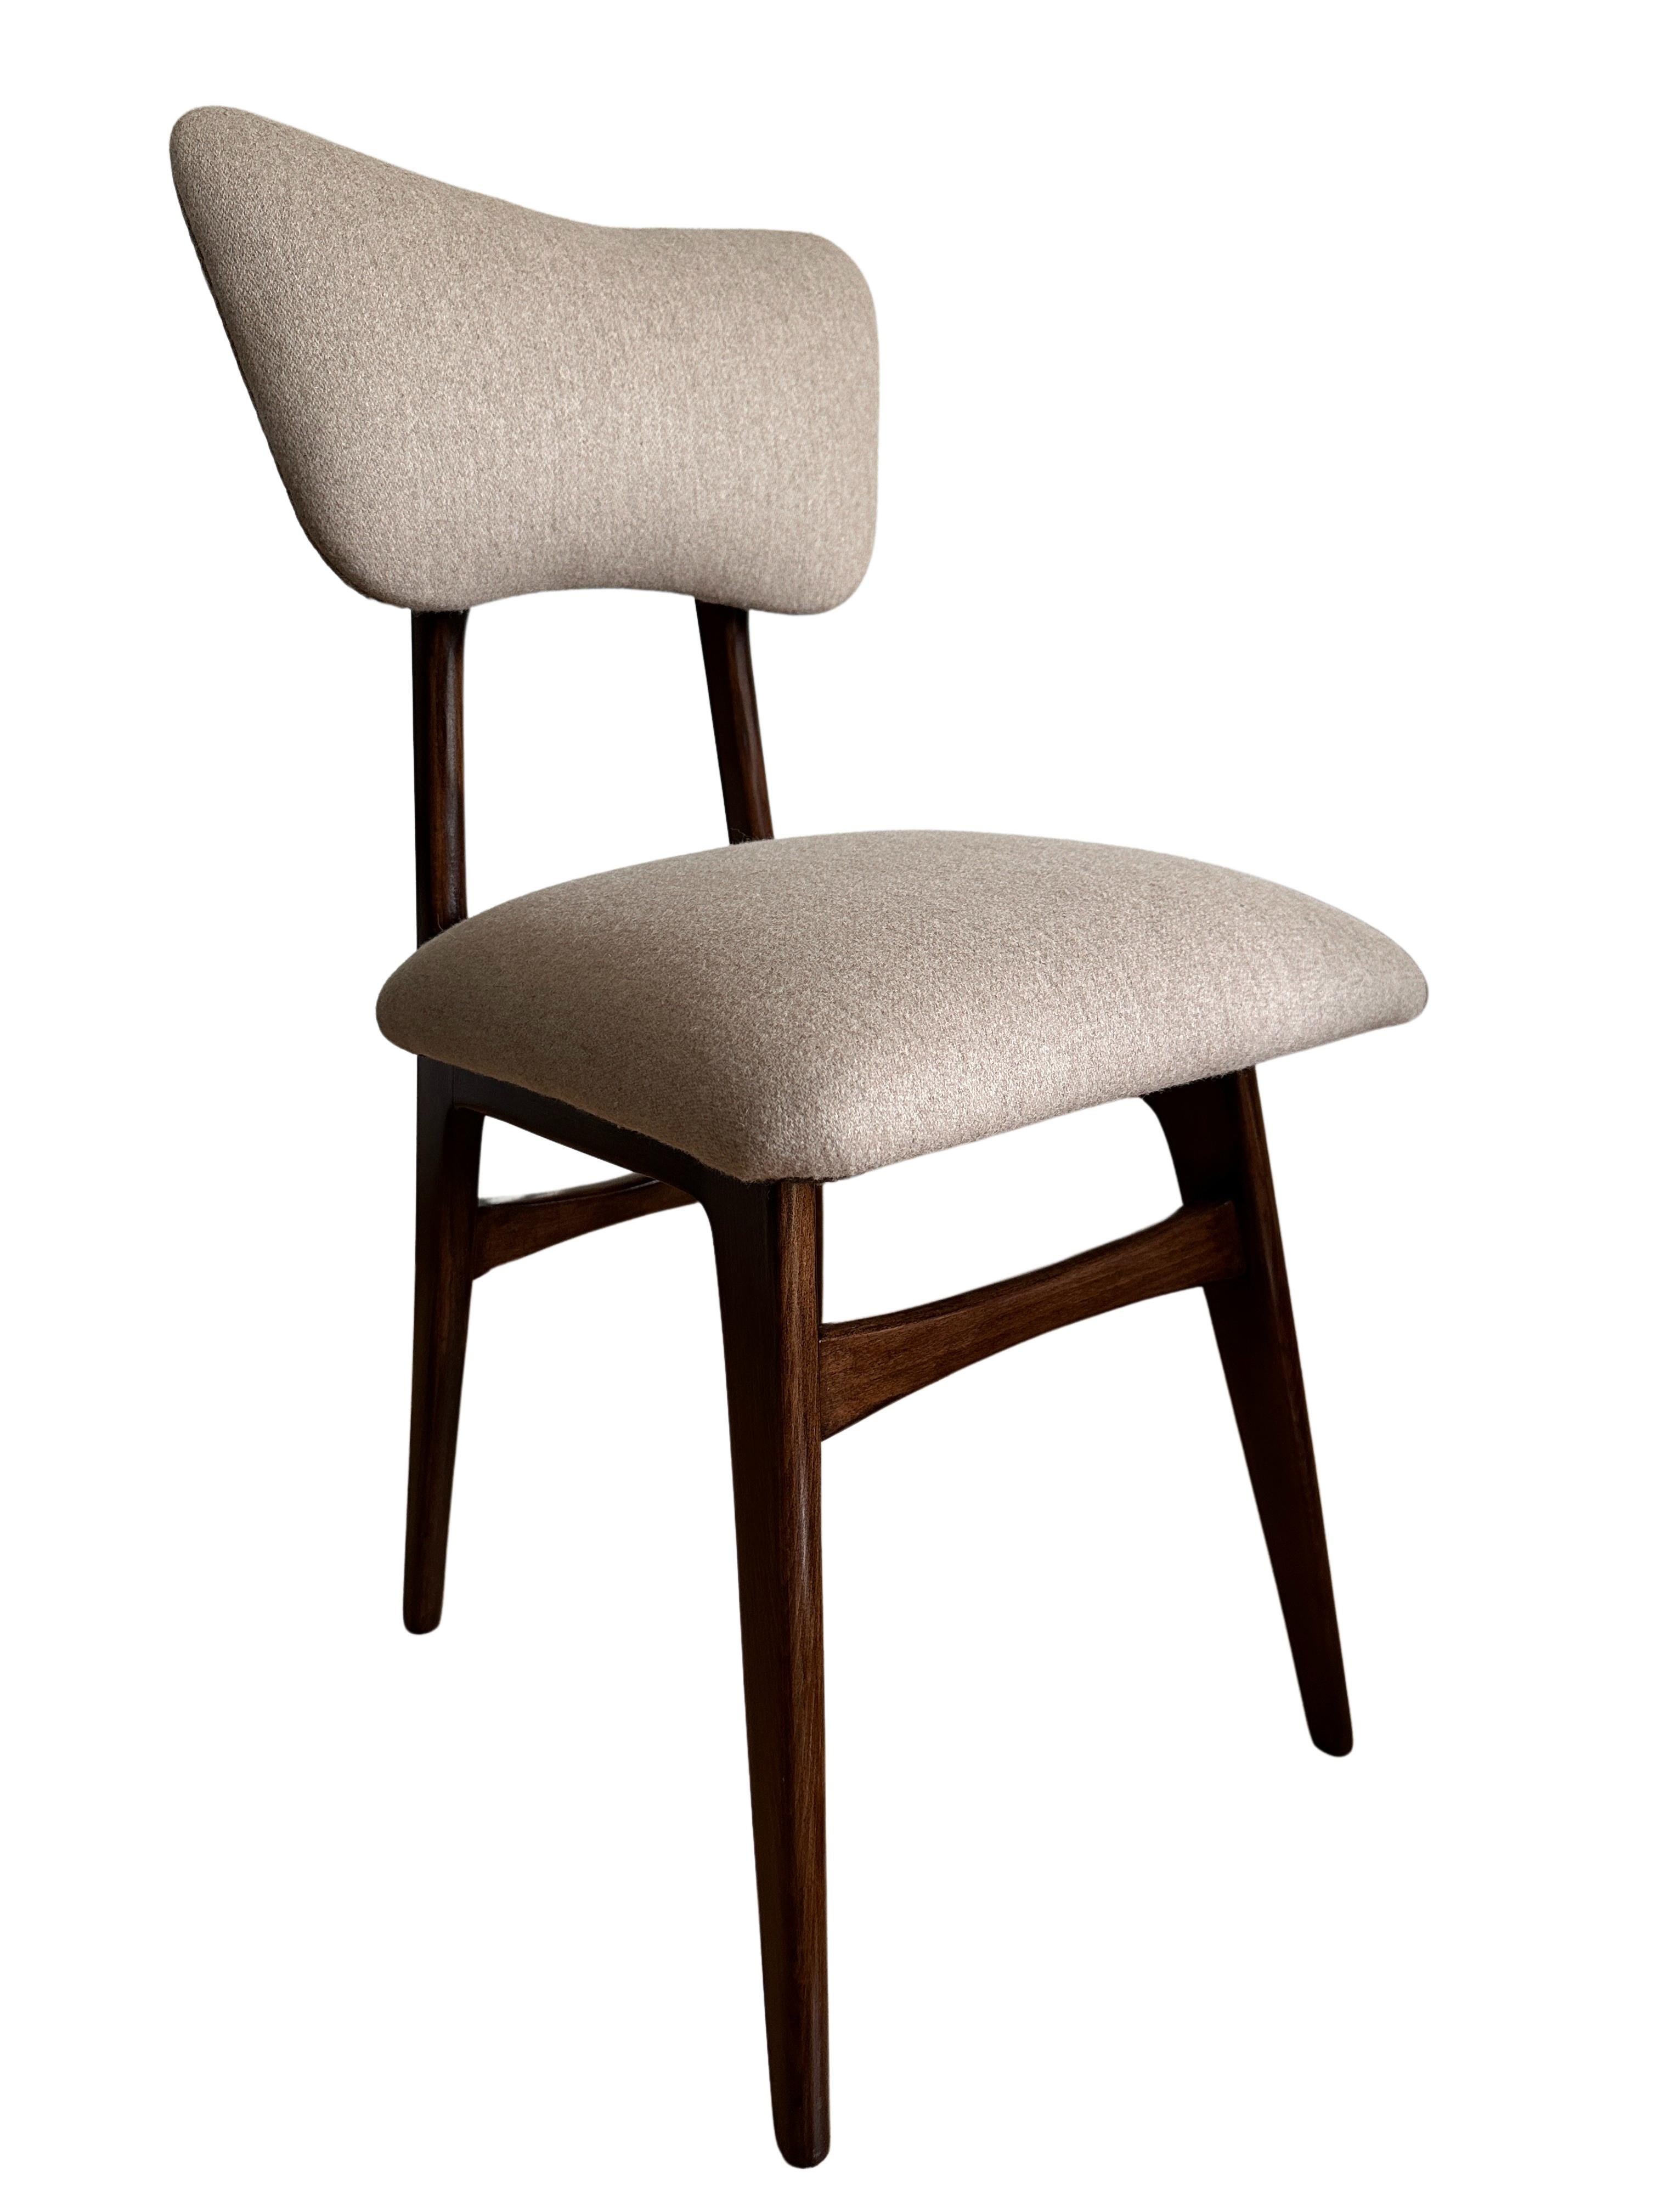 Midcentury Dining Chair in Beige Wool Upholstery, Poland, 1960s For Sale 5